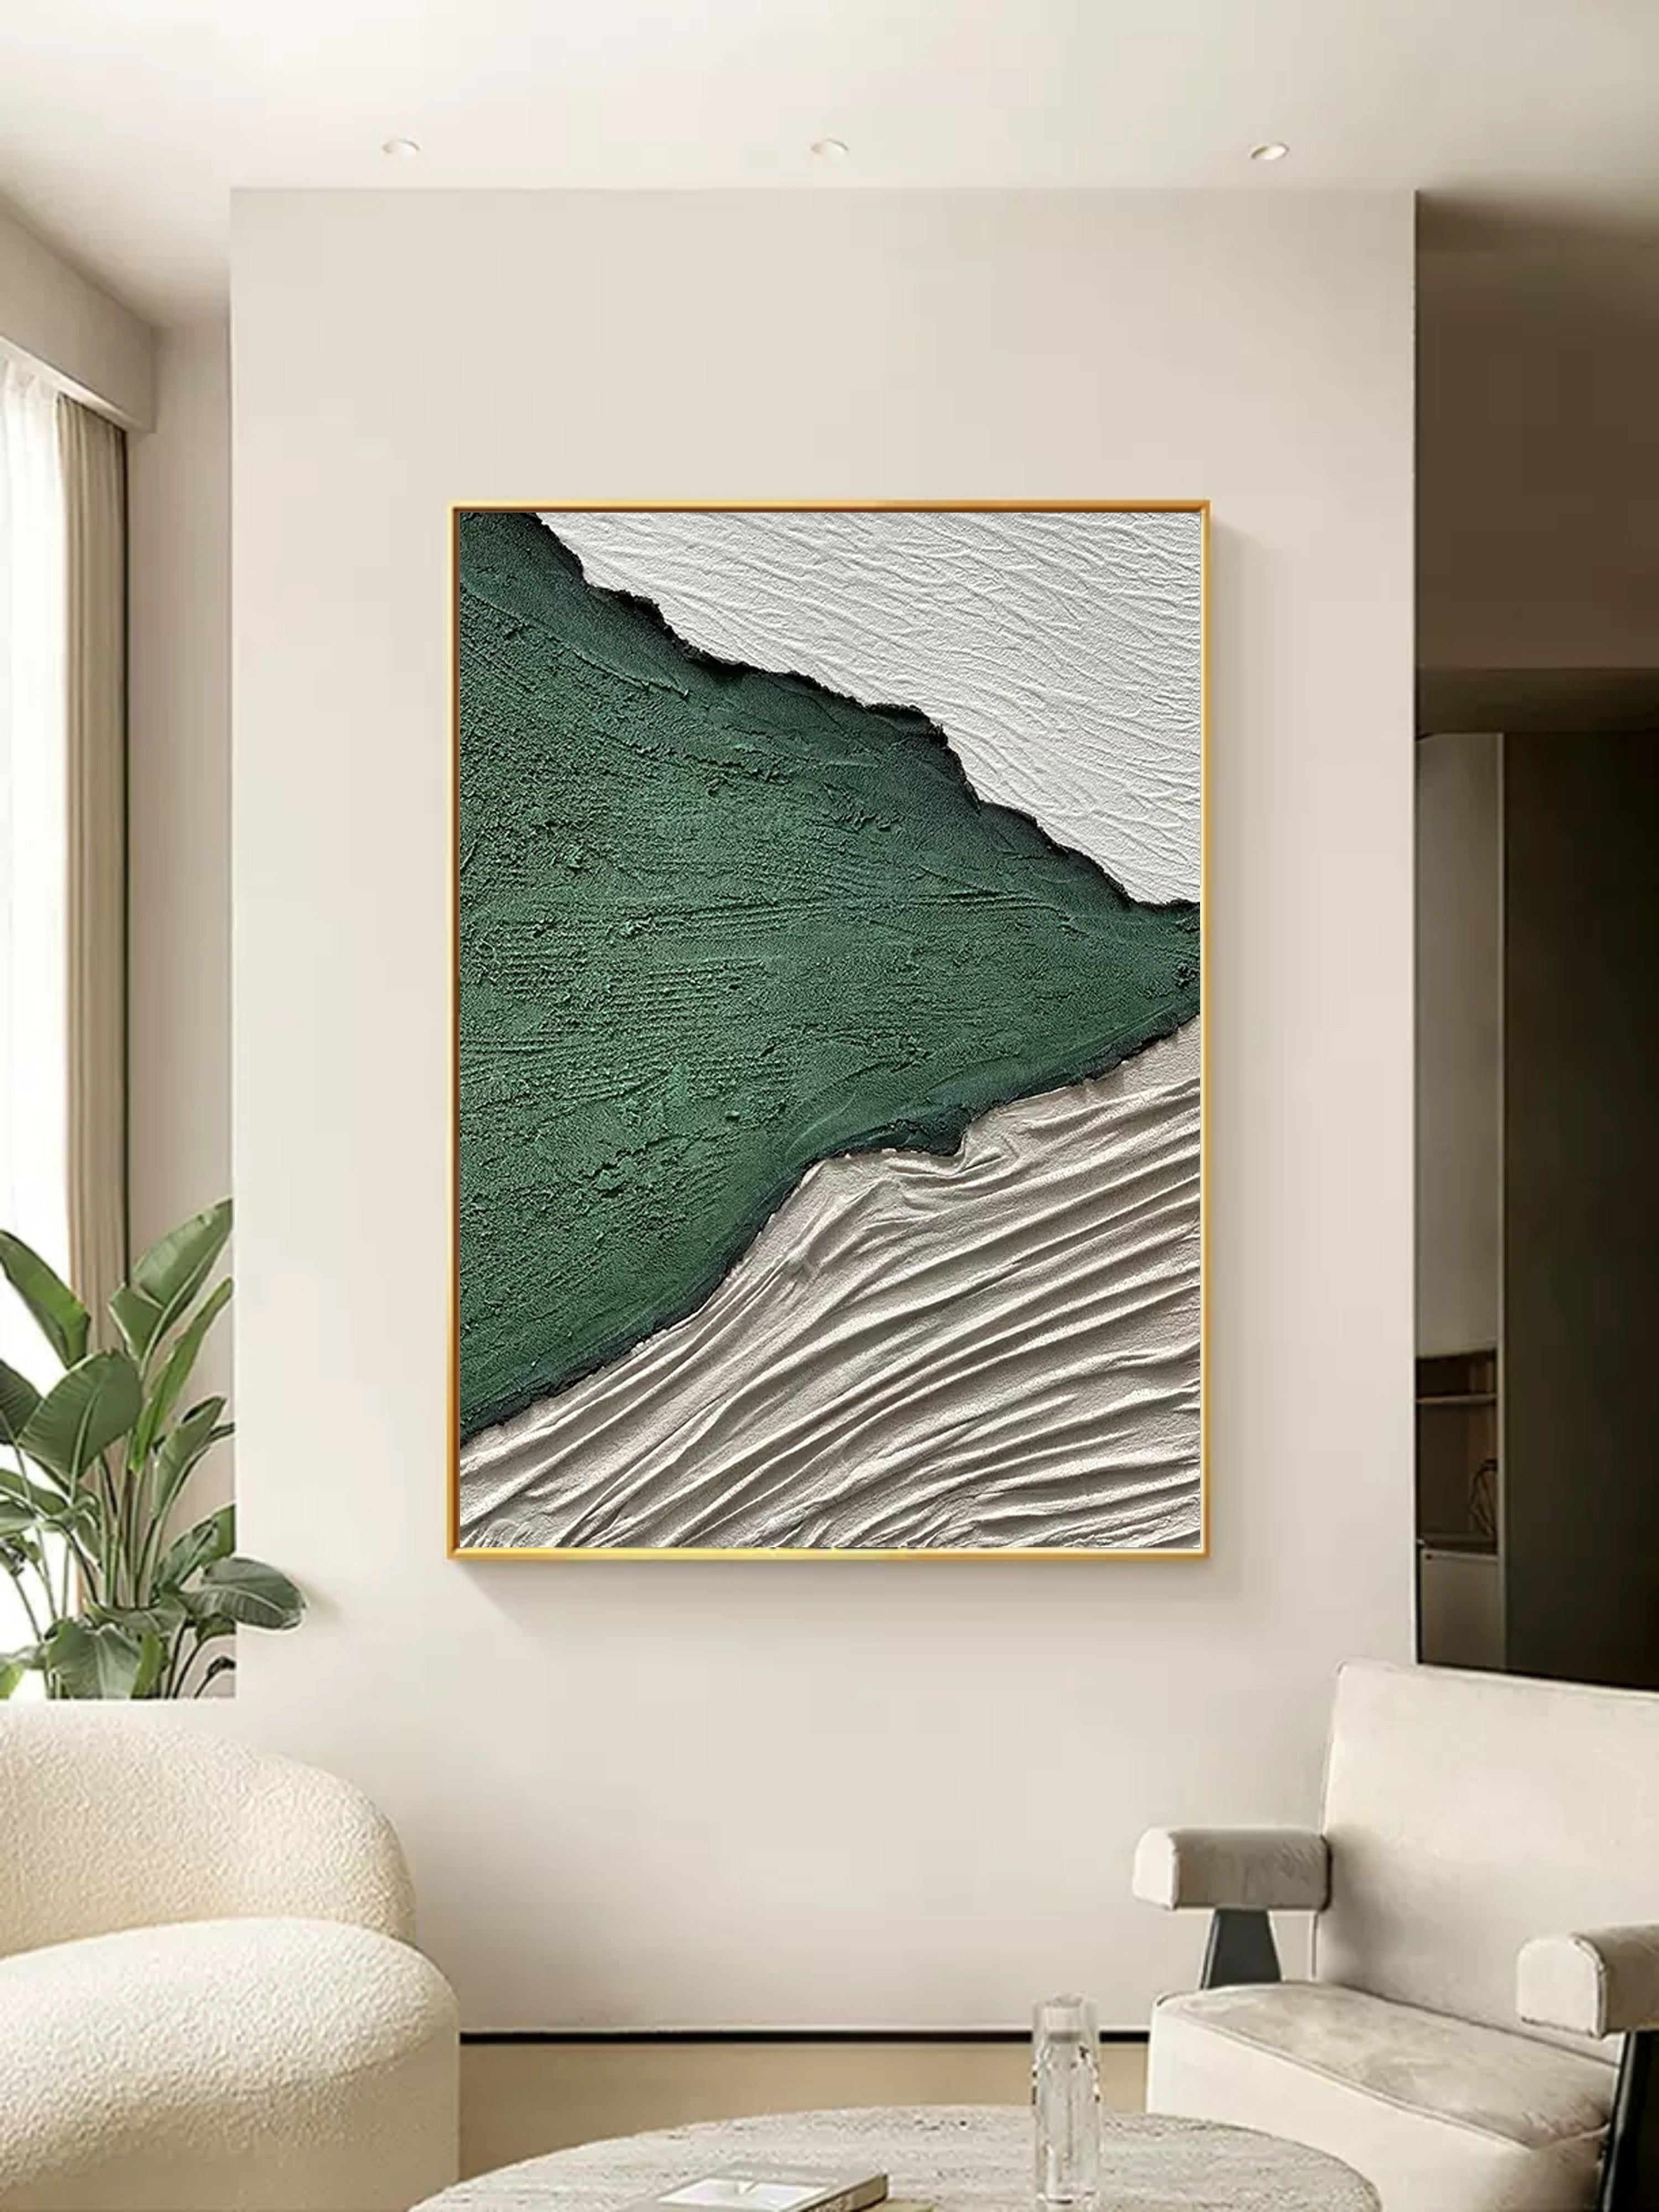 White and Green 3D Minimalist Abstract Painting Plaster Artwork on ...